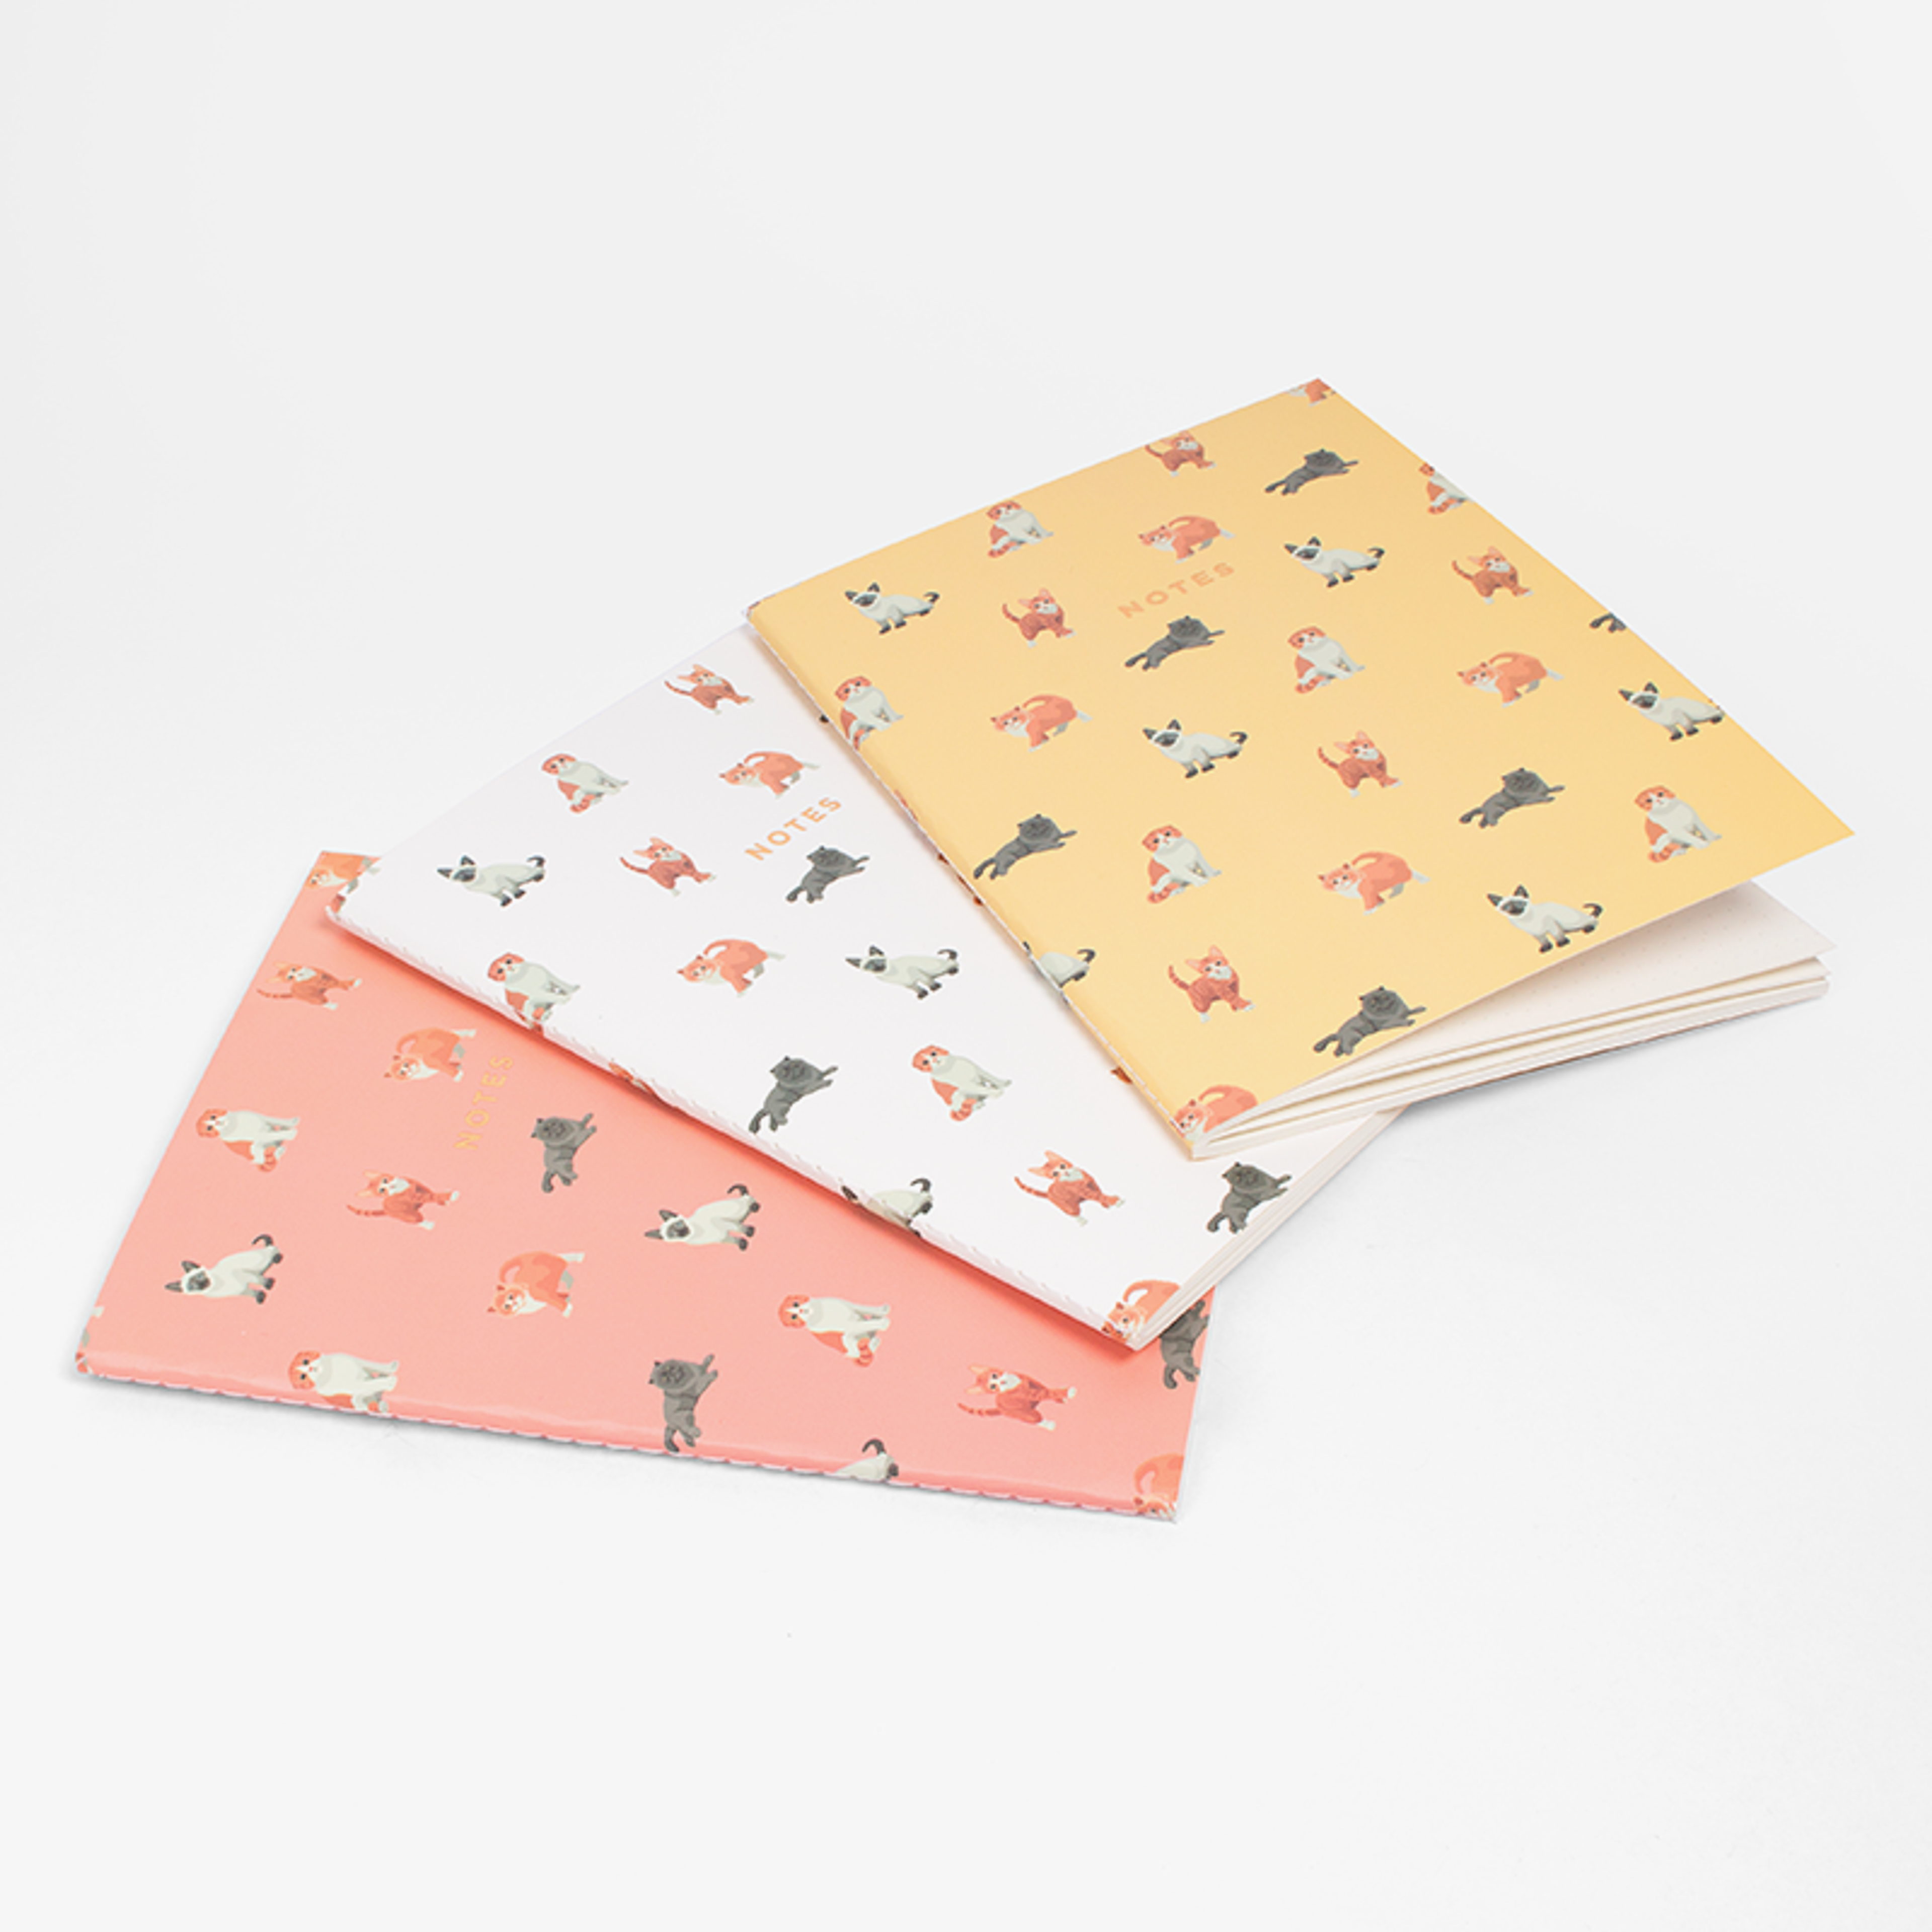 Large Meow Meow Notebook 3/Set